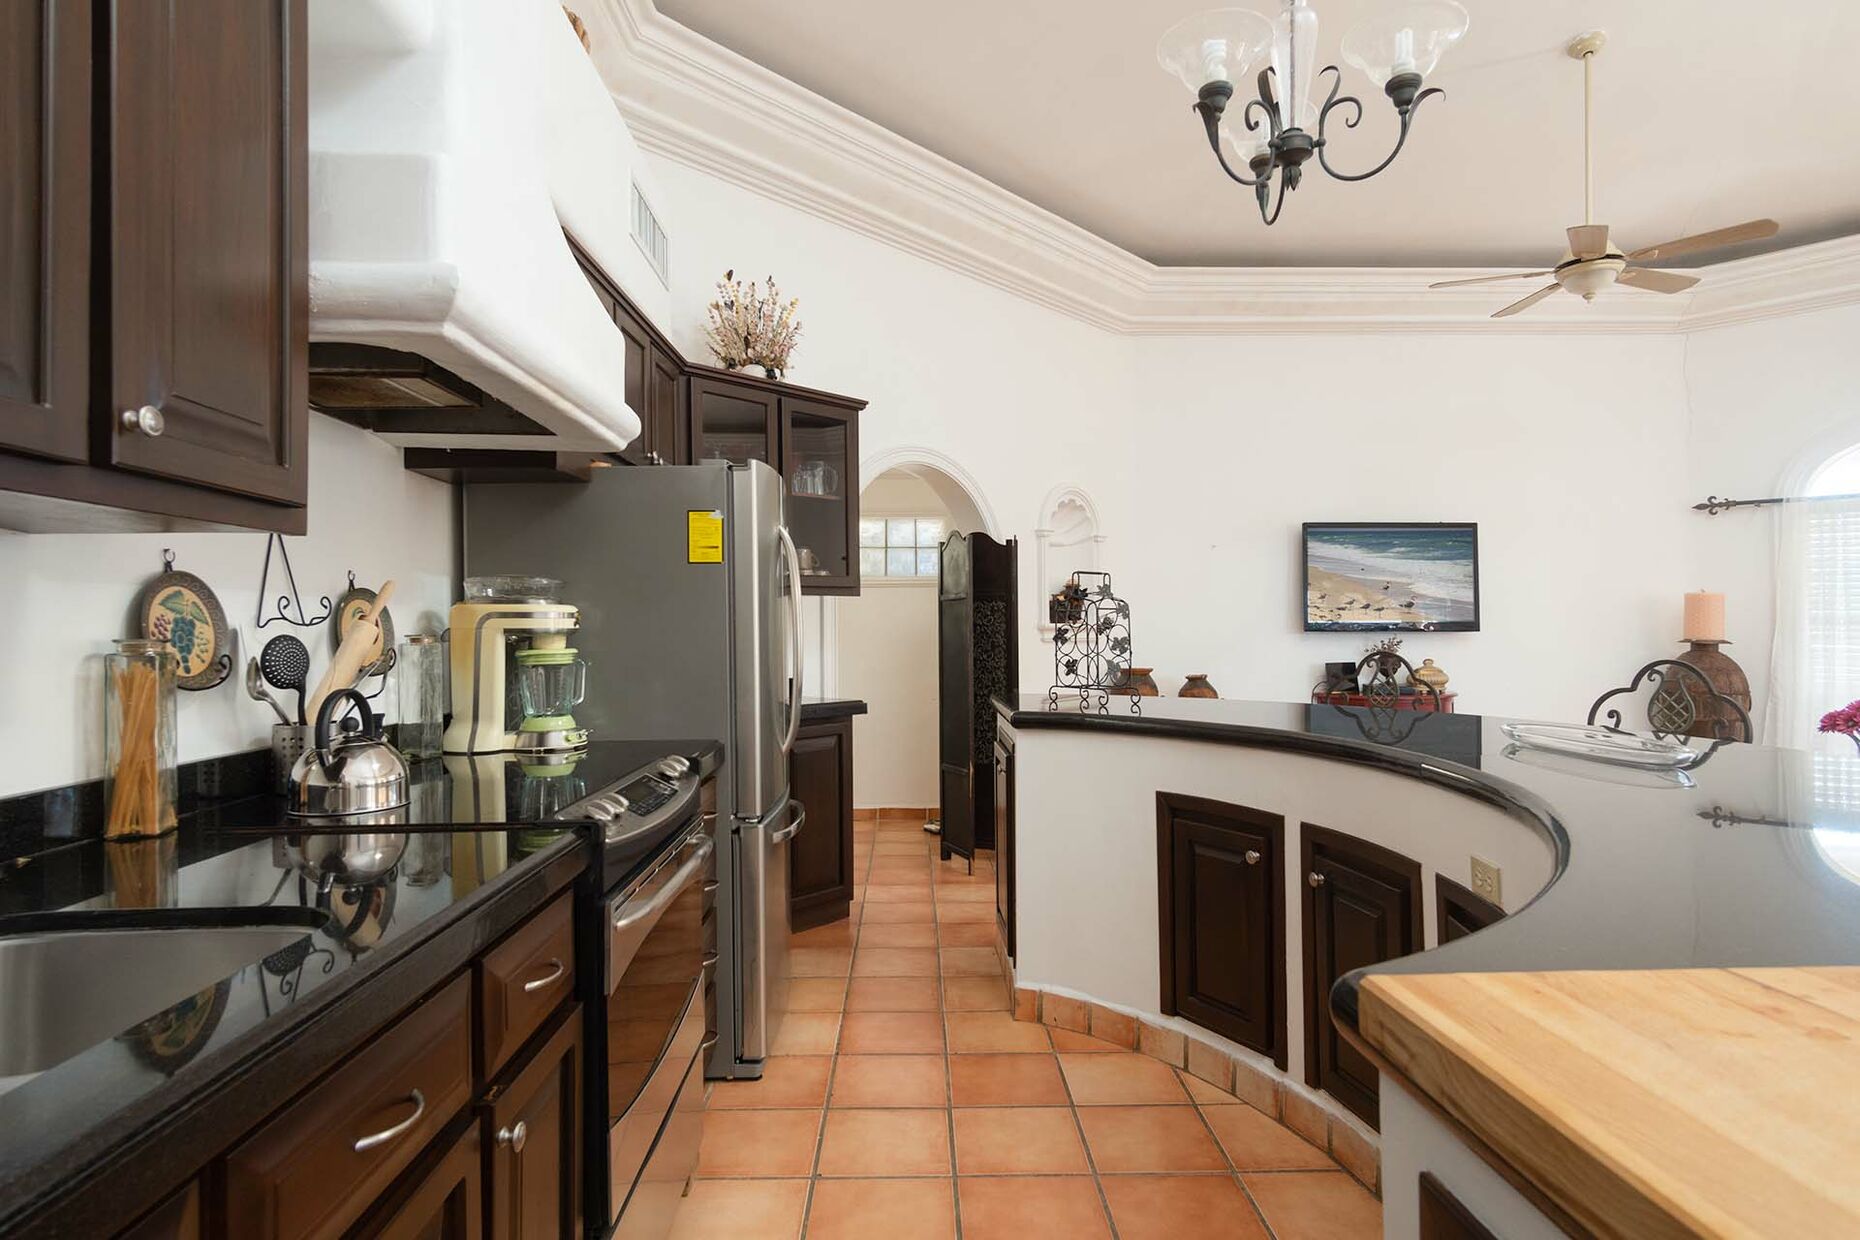 the kitchen is ample for entertaining